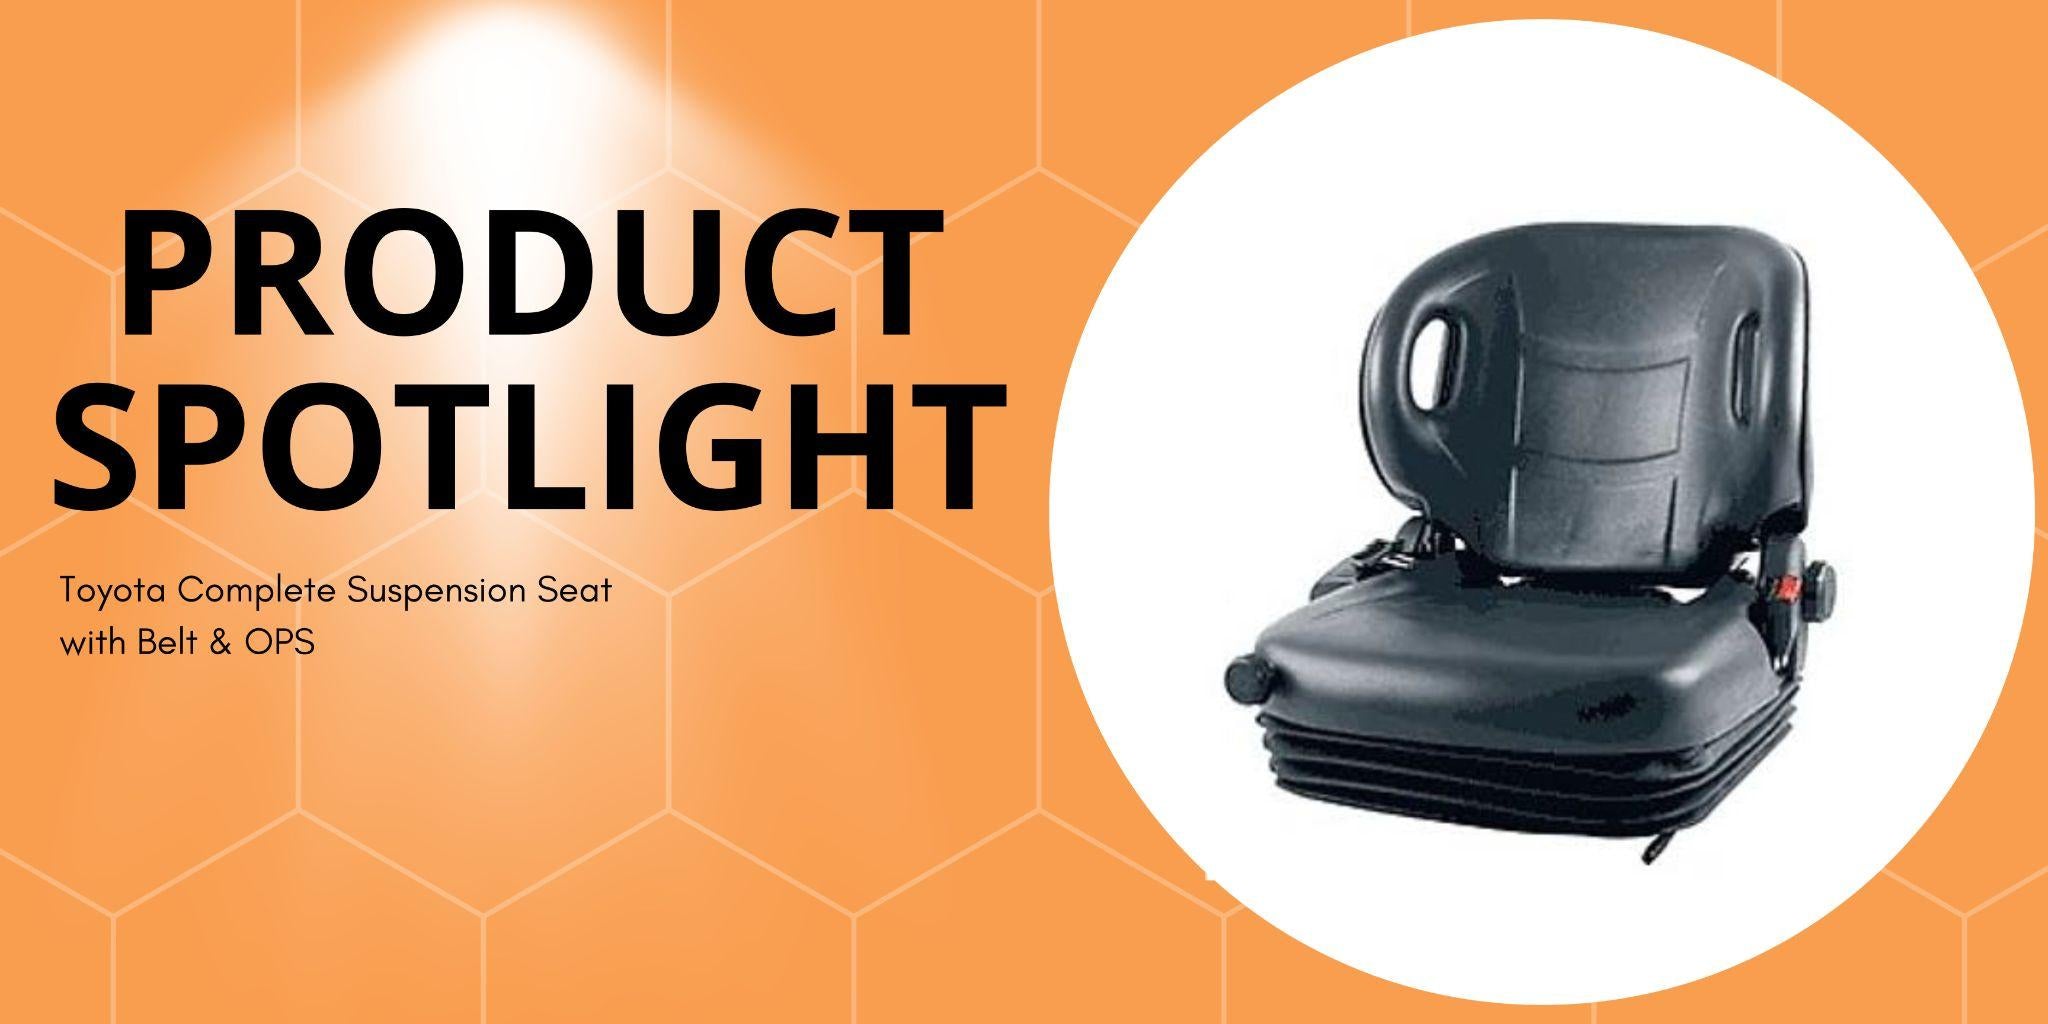 Product Spotlight forklift seating